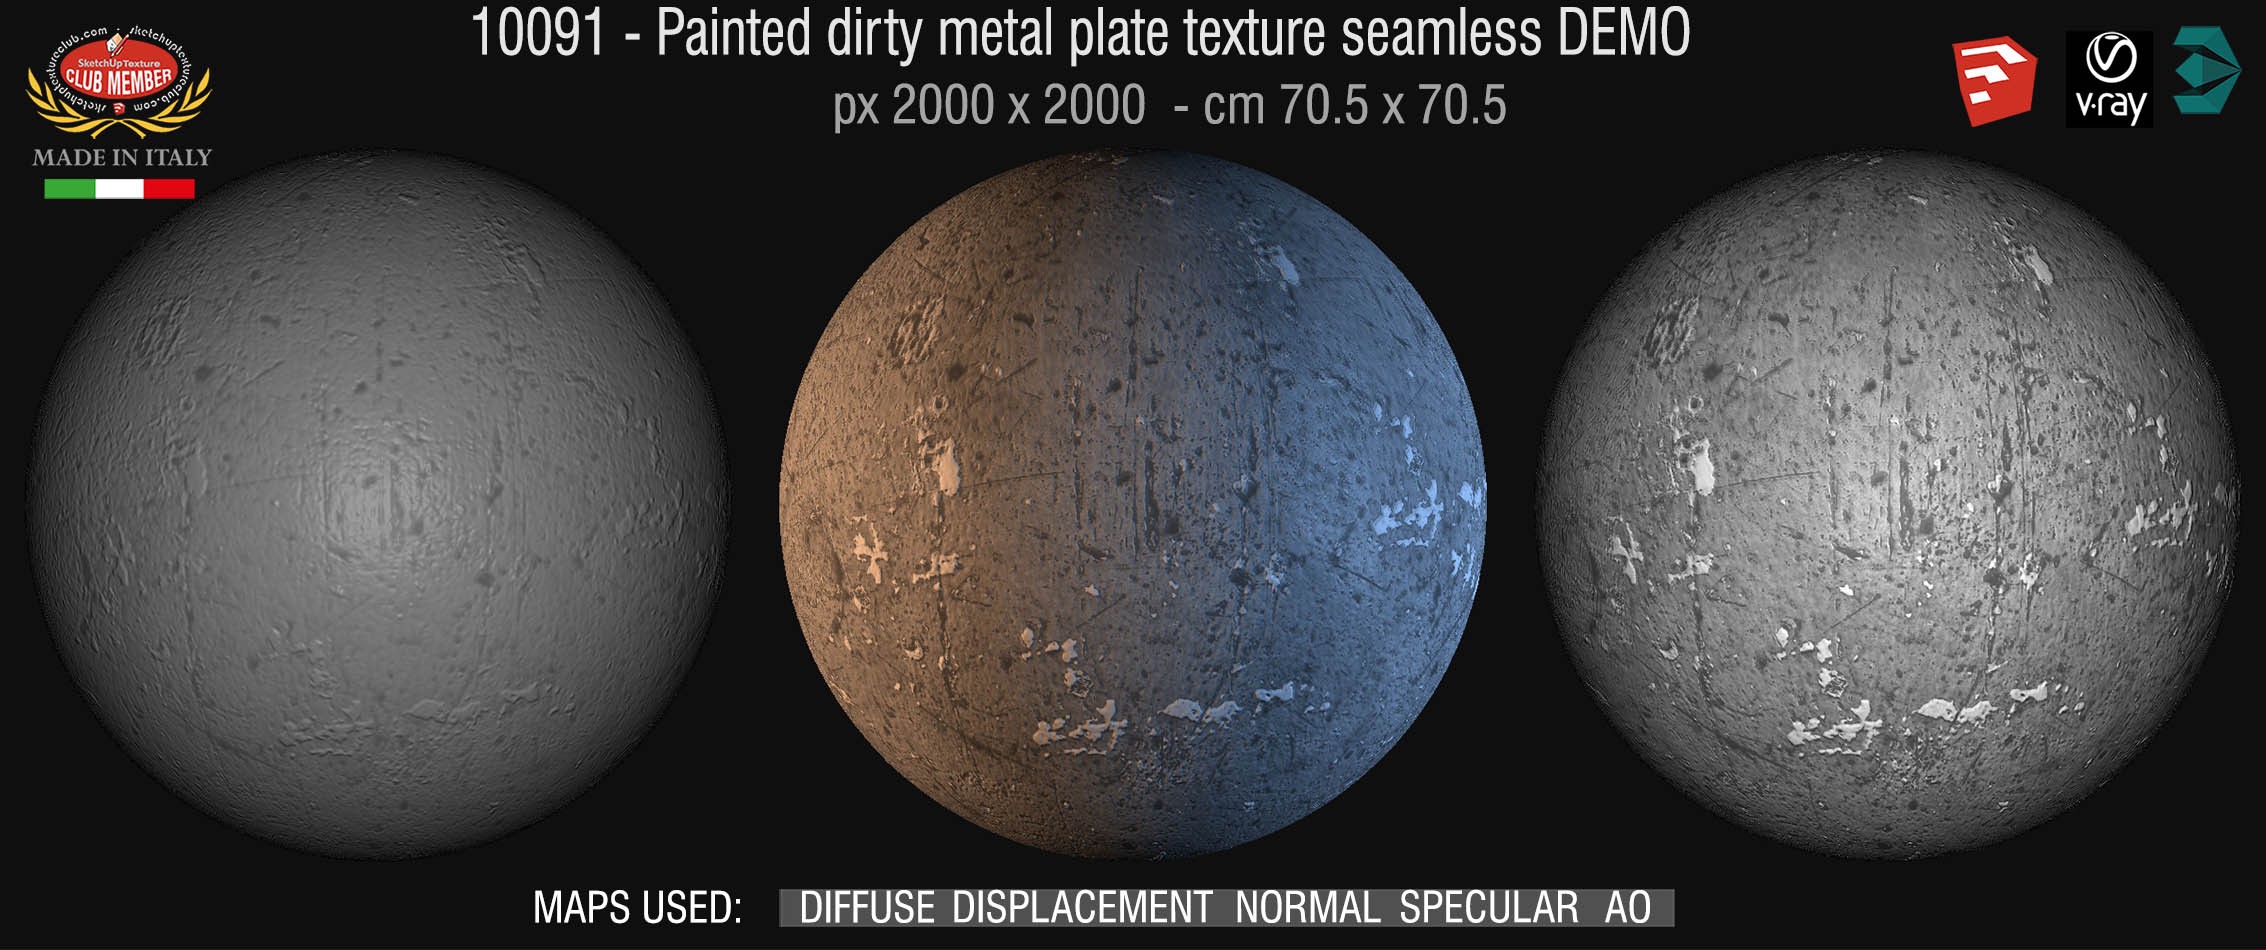 10091 HR Old dirty metal texture seamless + maps DEMO